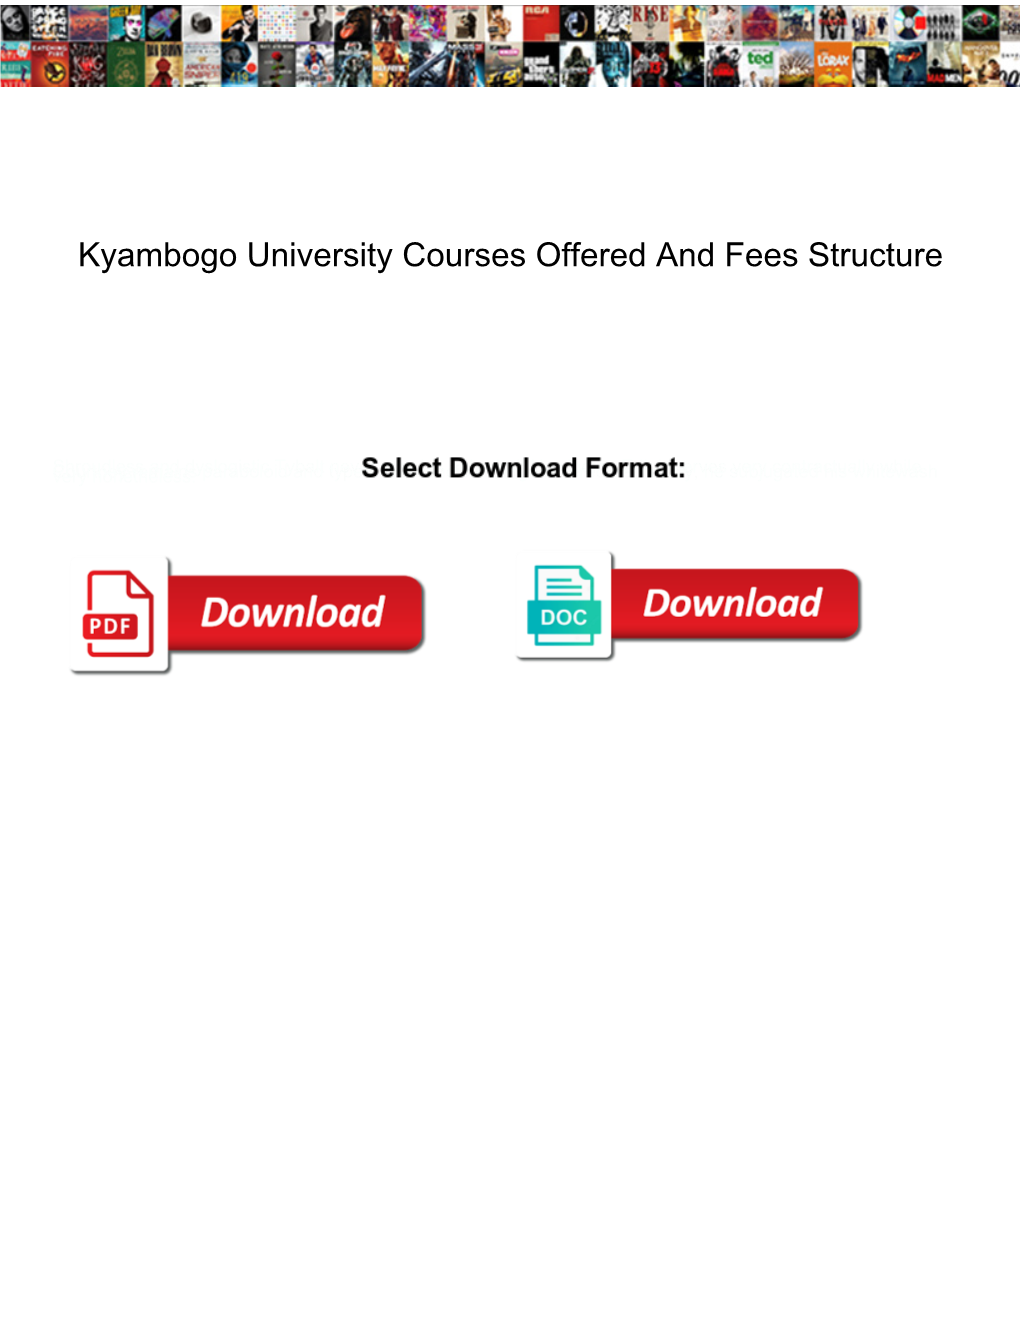 Kyambogo-University-Courses-Offered-And-Fees-Structure.Pdf